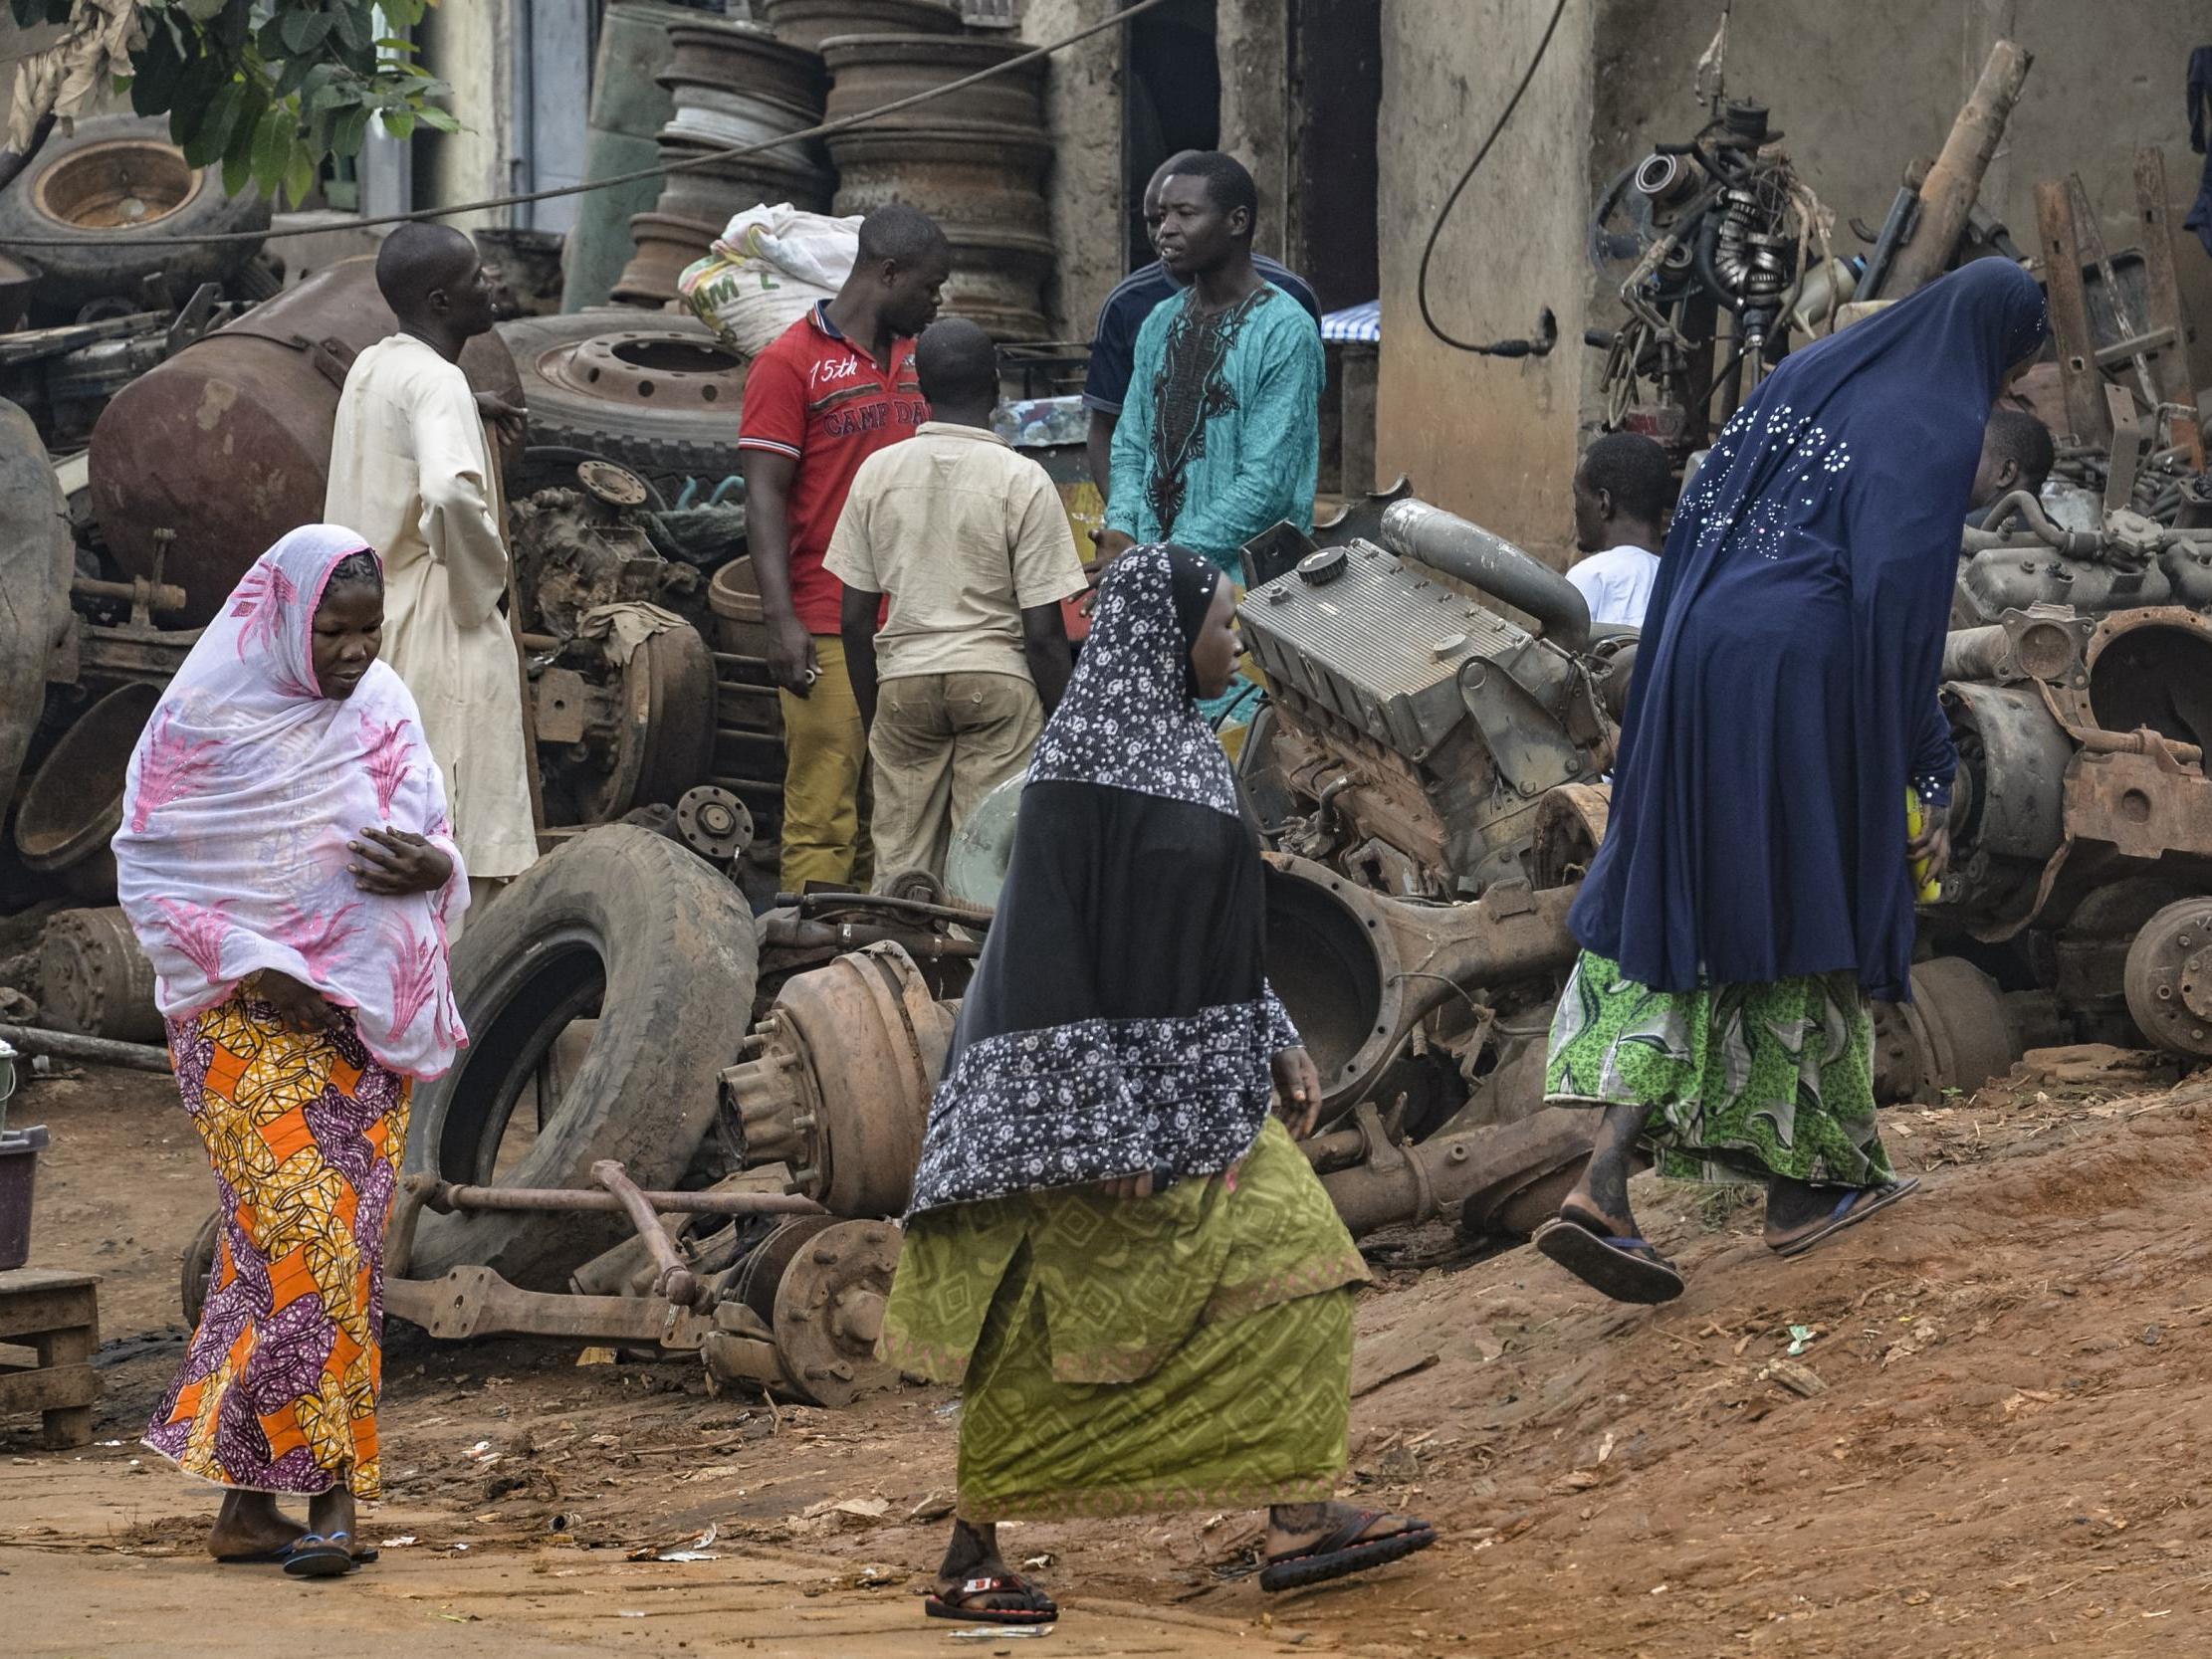 Muslim women walk in the Brituetterie district of Yaounde on 16 July 2015. This northern region of Cameroon has suffered frequent attacks. (Reinnier KAZE /